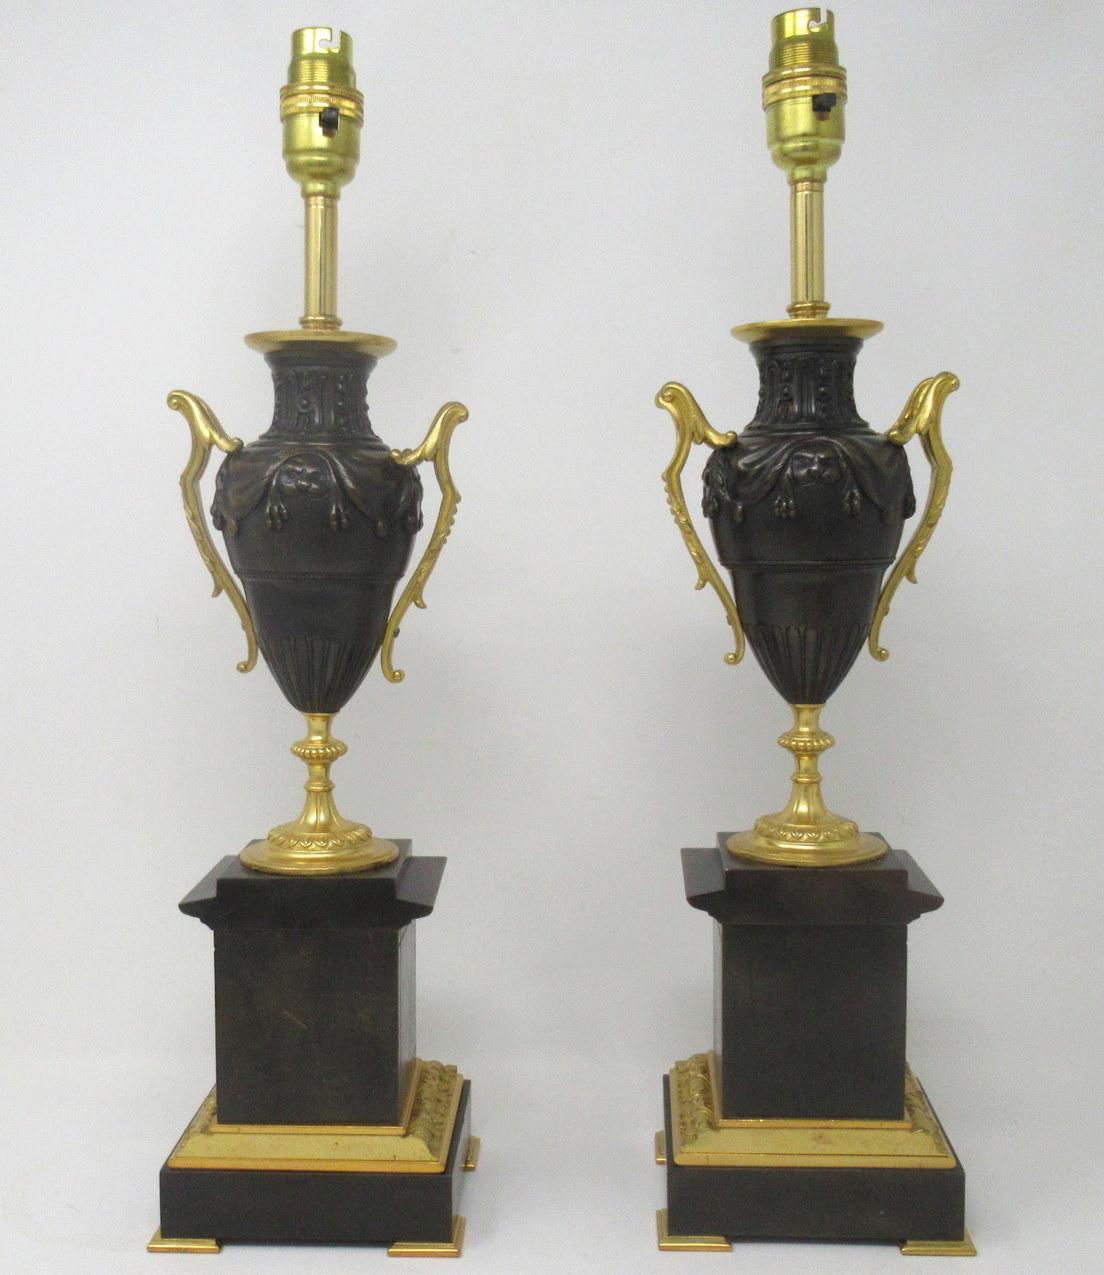 Antique Pair French Ormolu and Dore Bronze Grand Tour Electric Table Urns Lamps In Good Condition For Sale In Dublin, Ireland